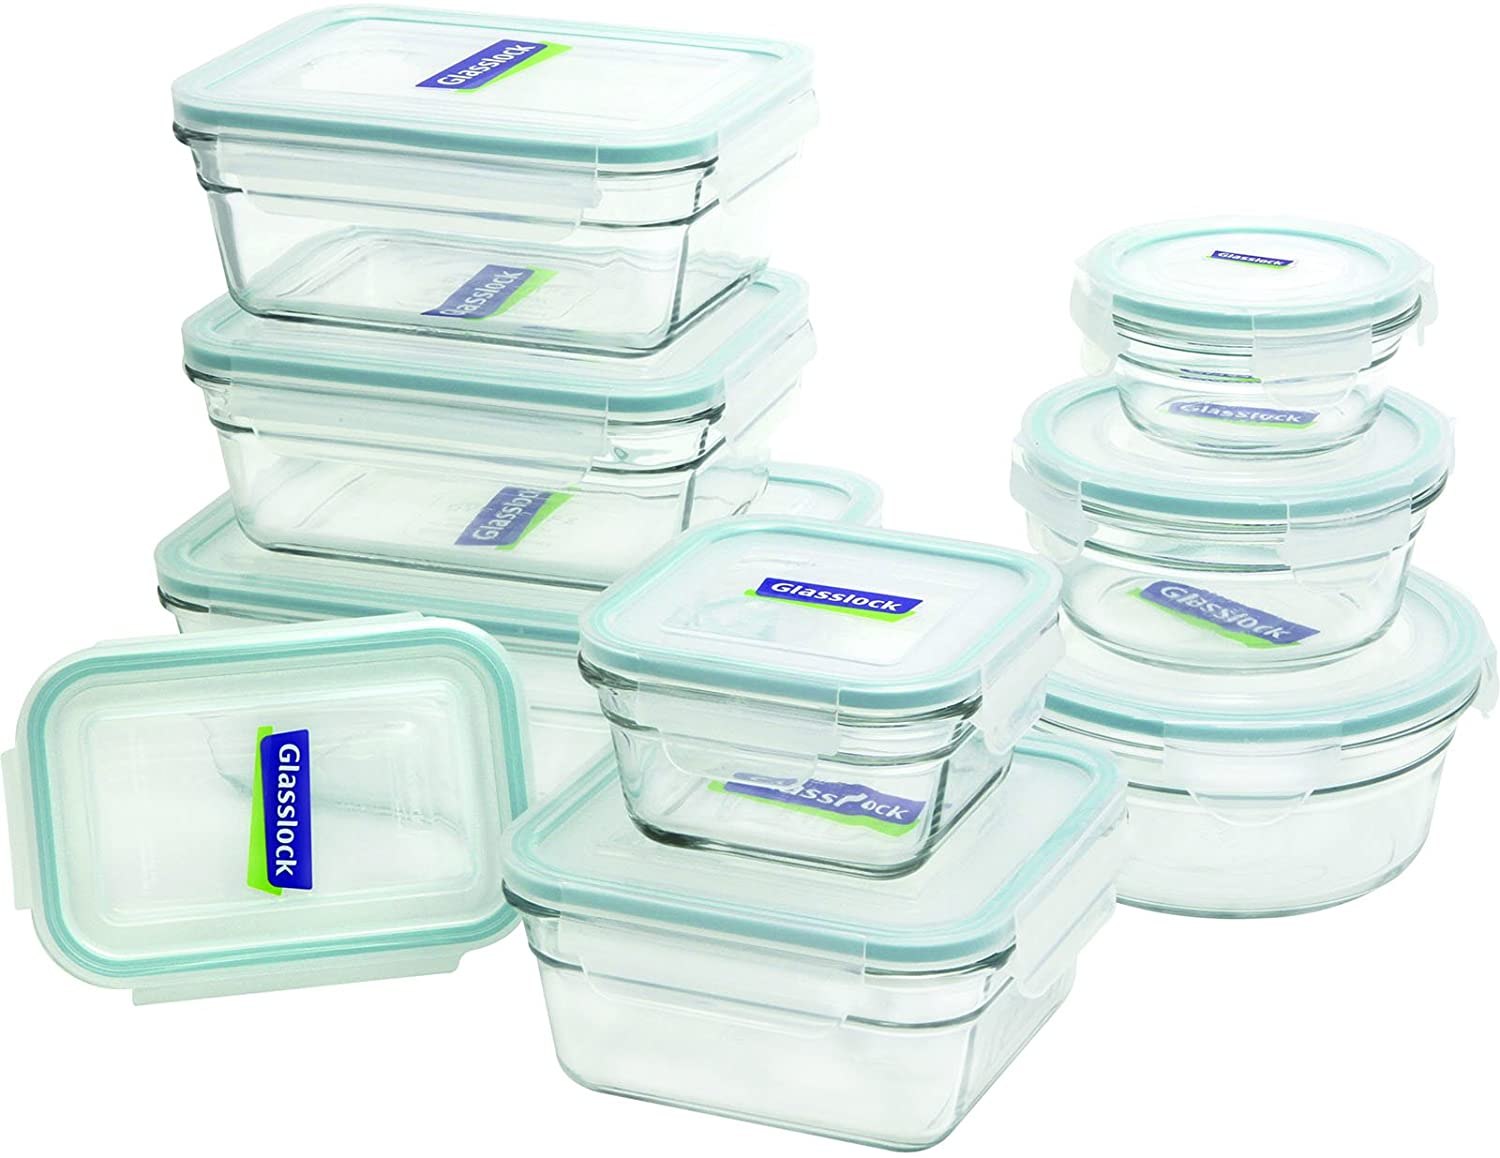 Razab HomeGoods extra large & assorted sizes glass food storage containers  with airtight lids 10 pc [5 containers with lids] microwave/oven/fre